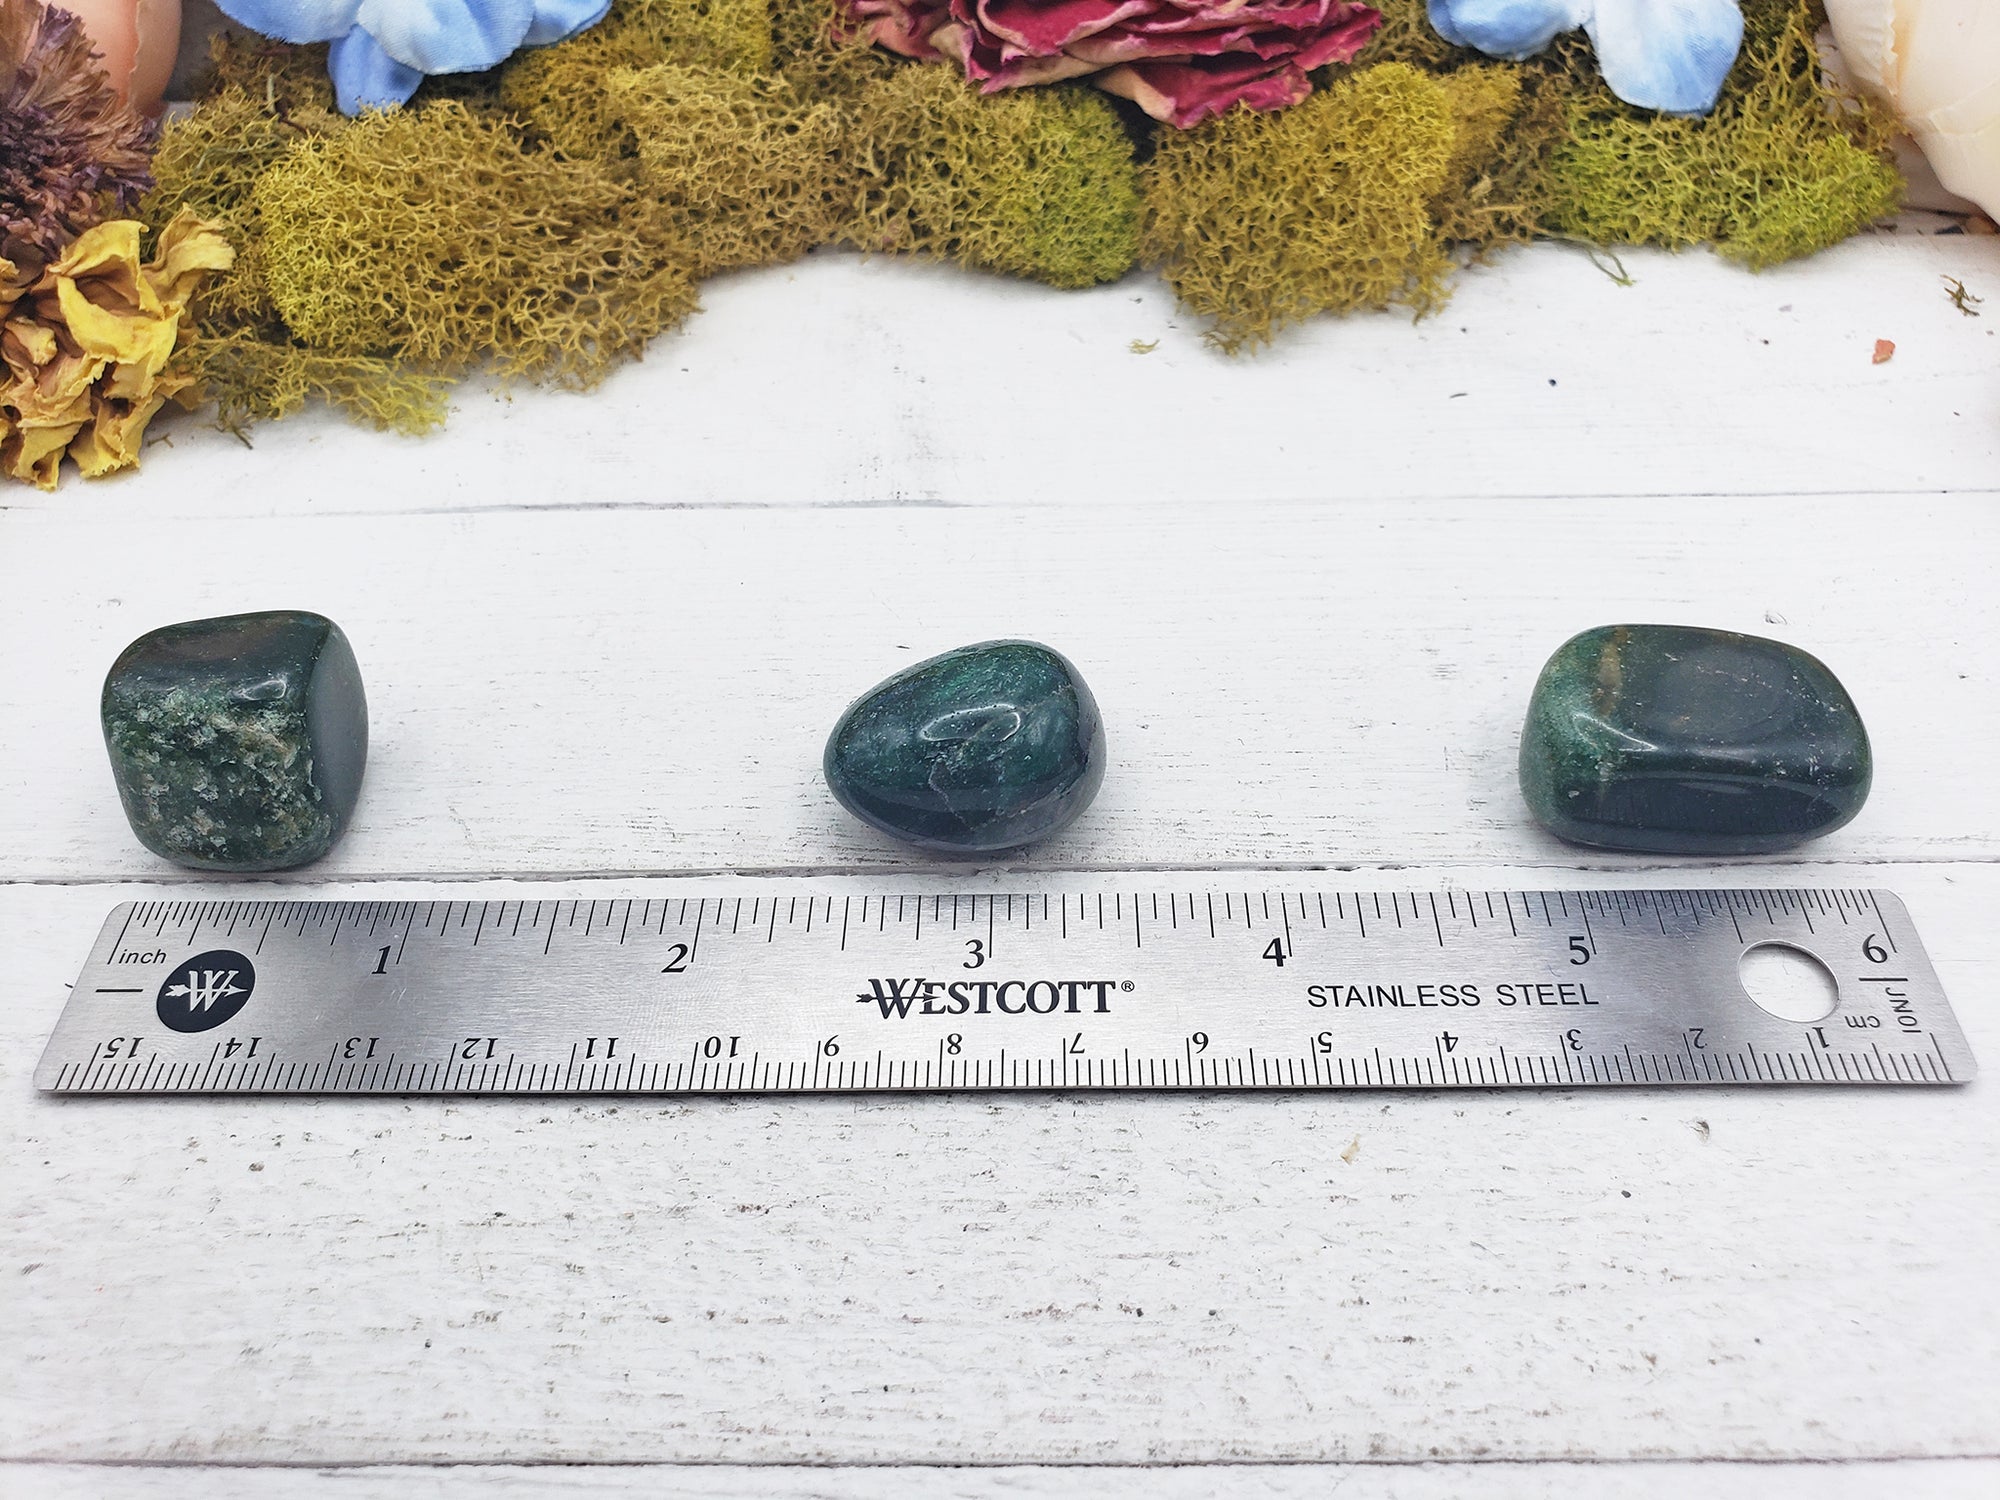 fuchsite crystals by ruler